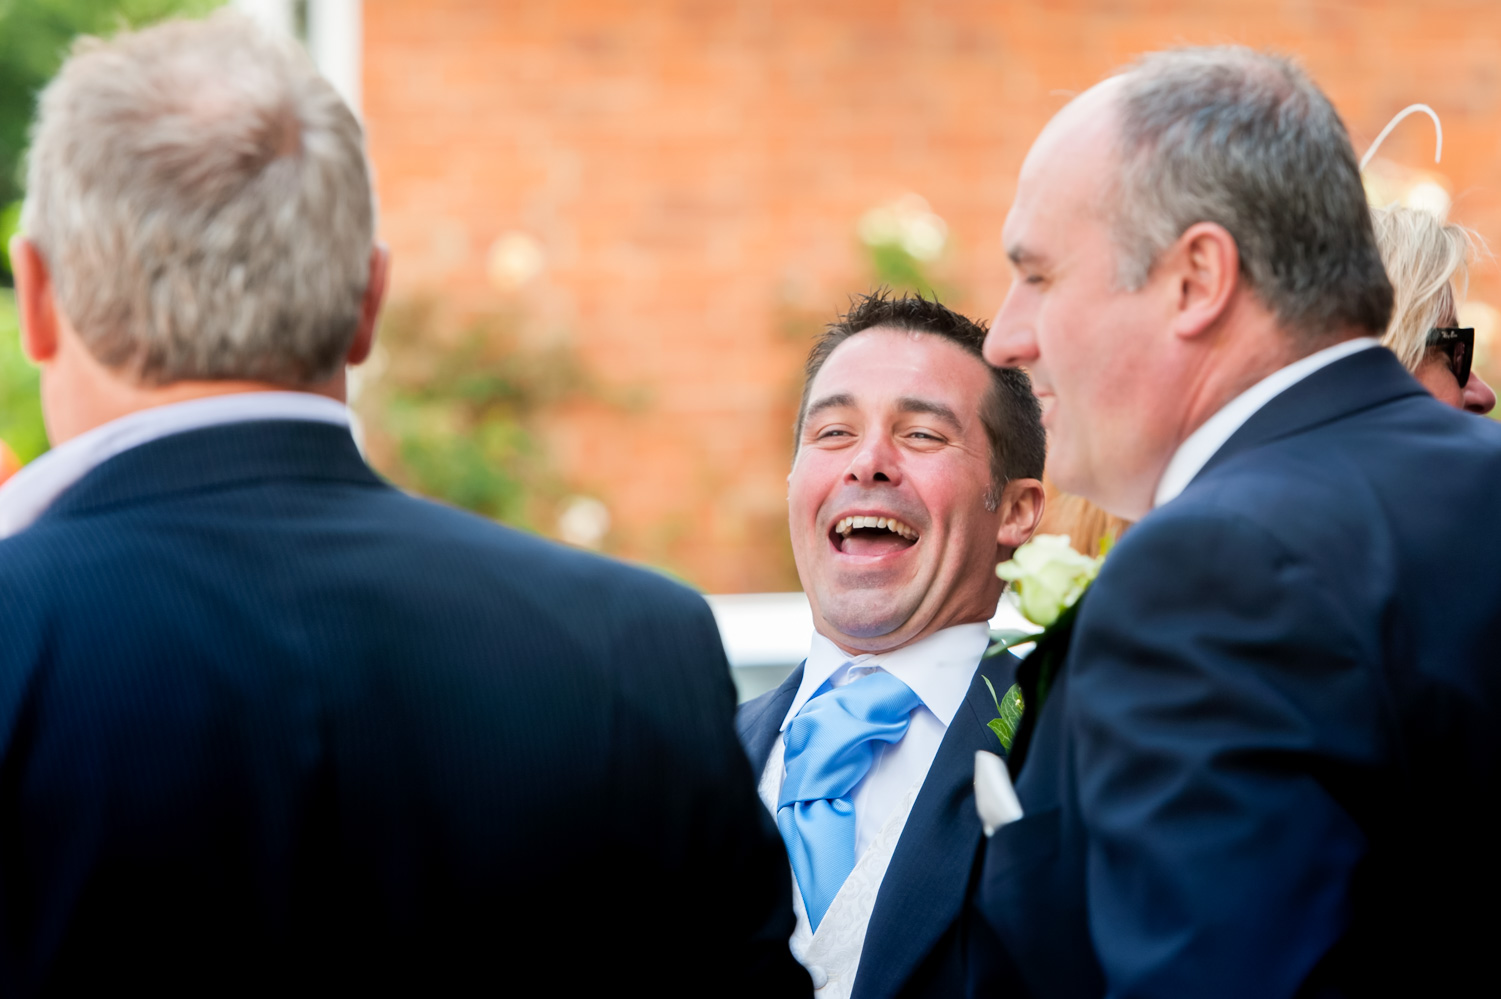 Groom laughing with friends by Sussex documentary photographer James Robertshaw